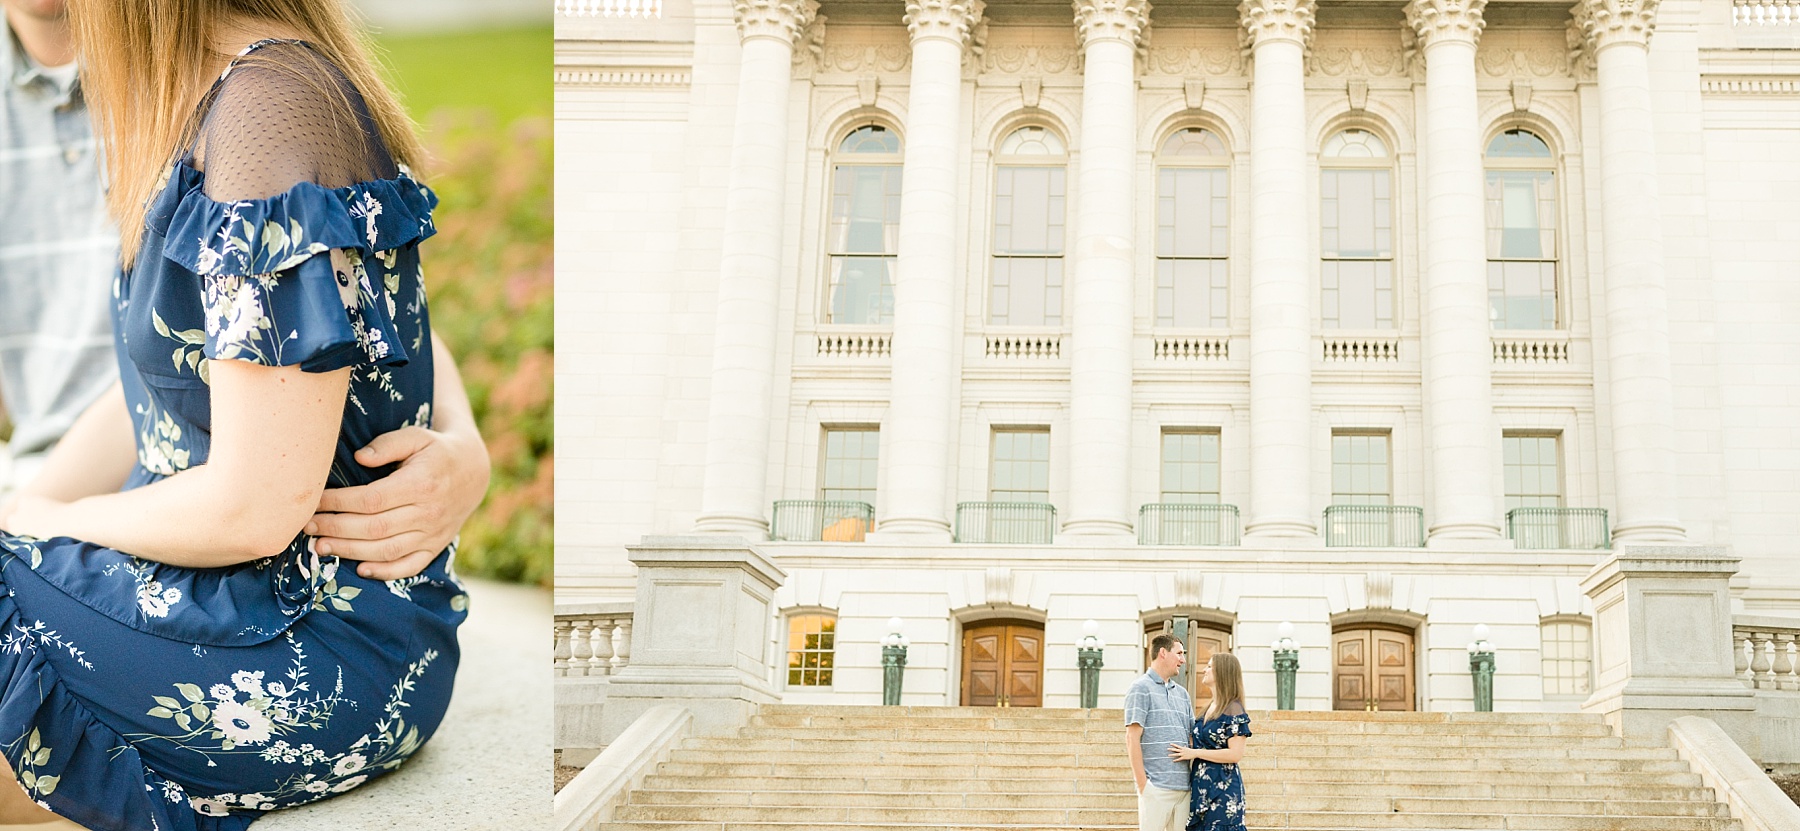 In the spot where he proposed, we photographed their engagement photos for a state capitol engagement session in Madison, WI